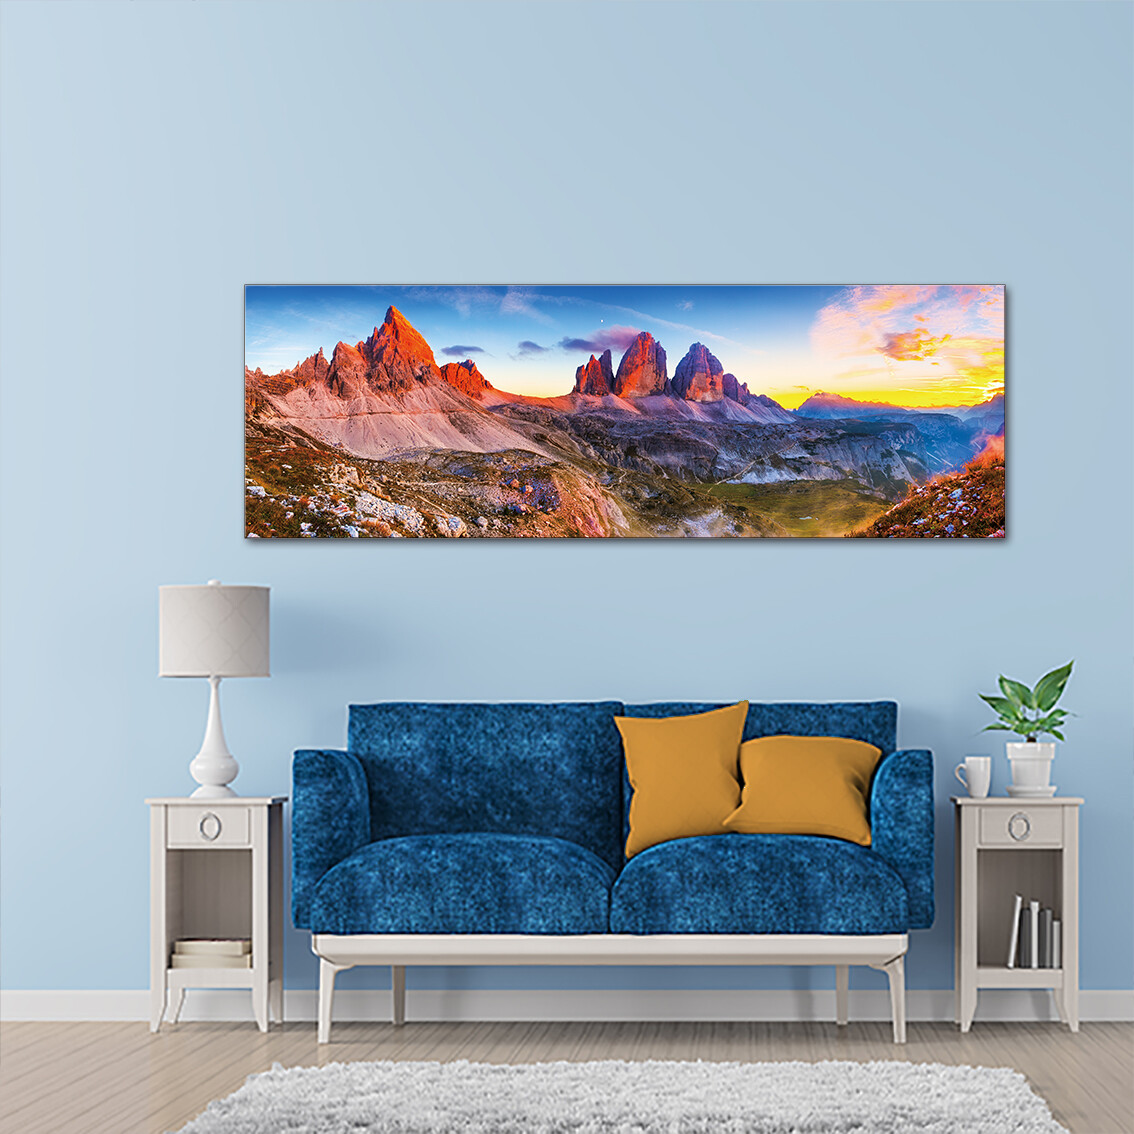 Canyonlands Utah National park - Modern Luxury Wall art Printed on Acrylic Glass - Frameless and Ready to Hang